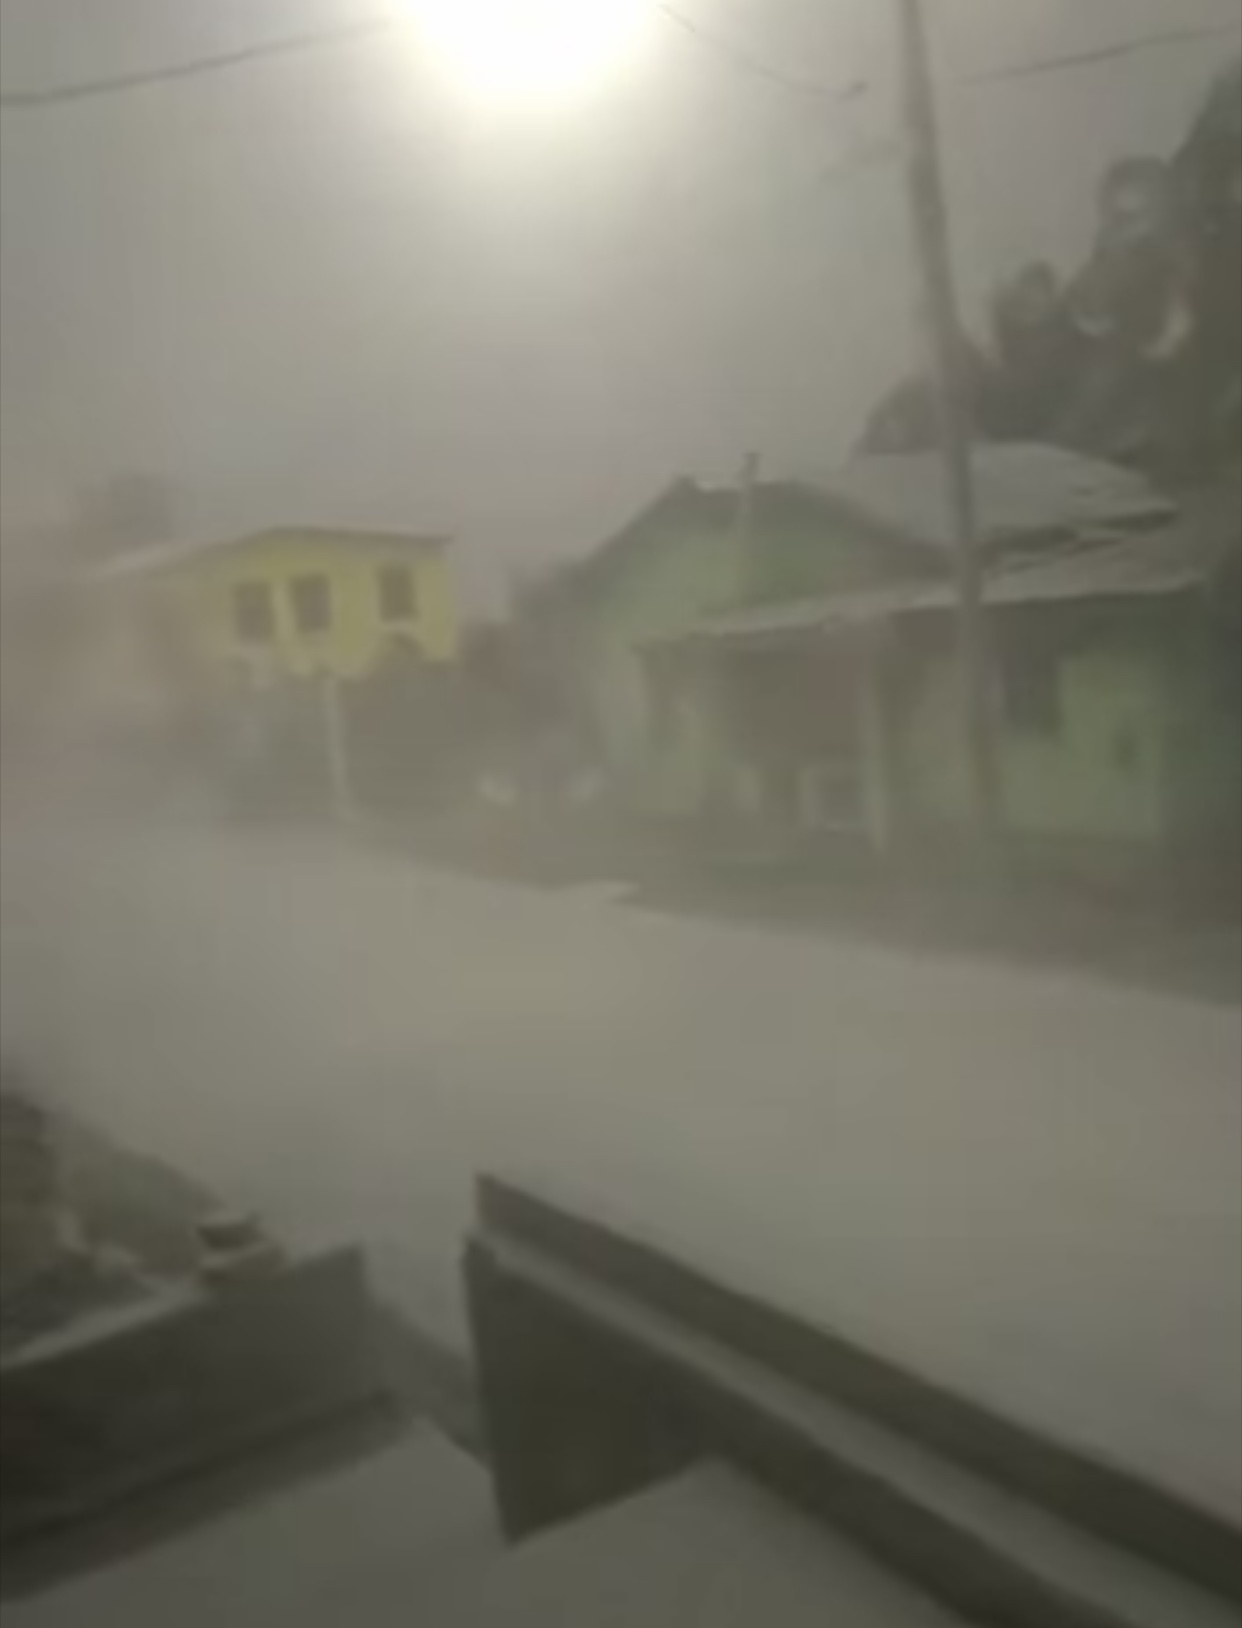 Midday turns to midnight in St Vincent with volcanic ash